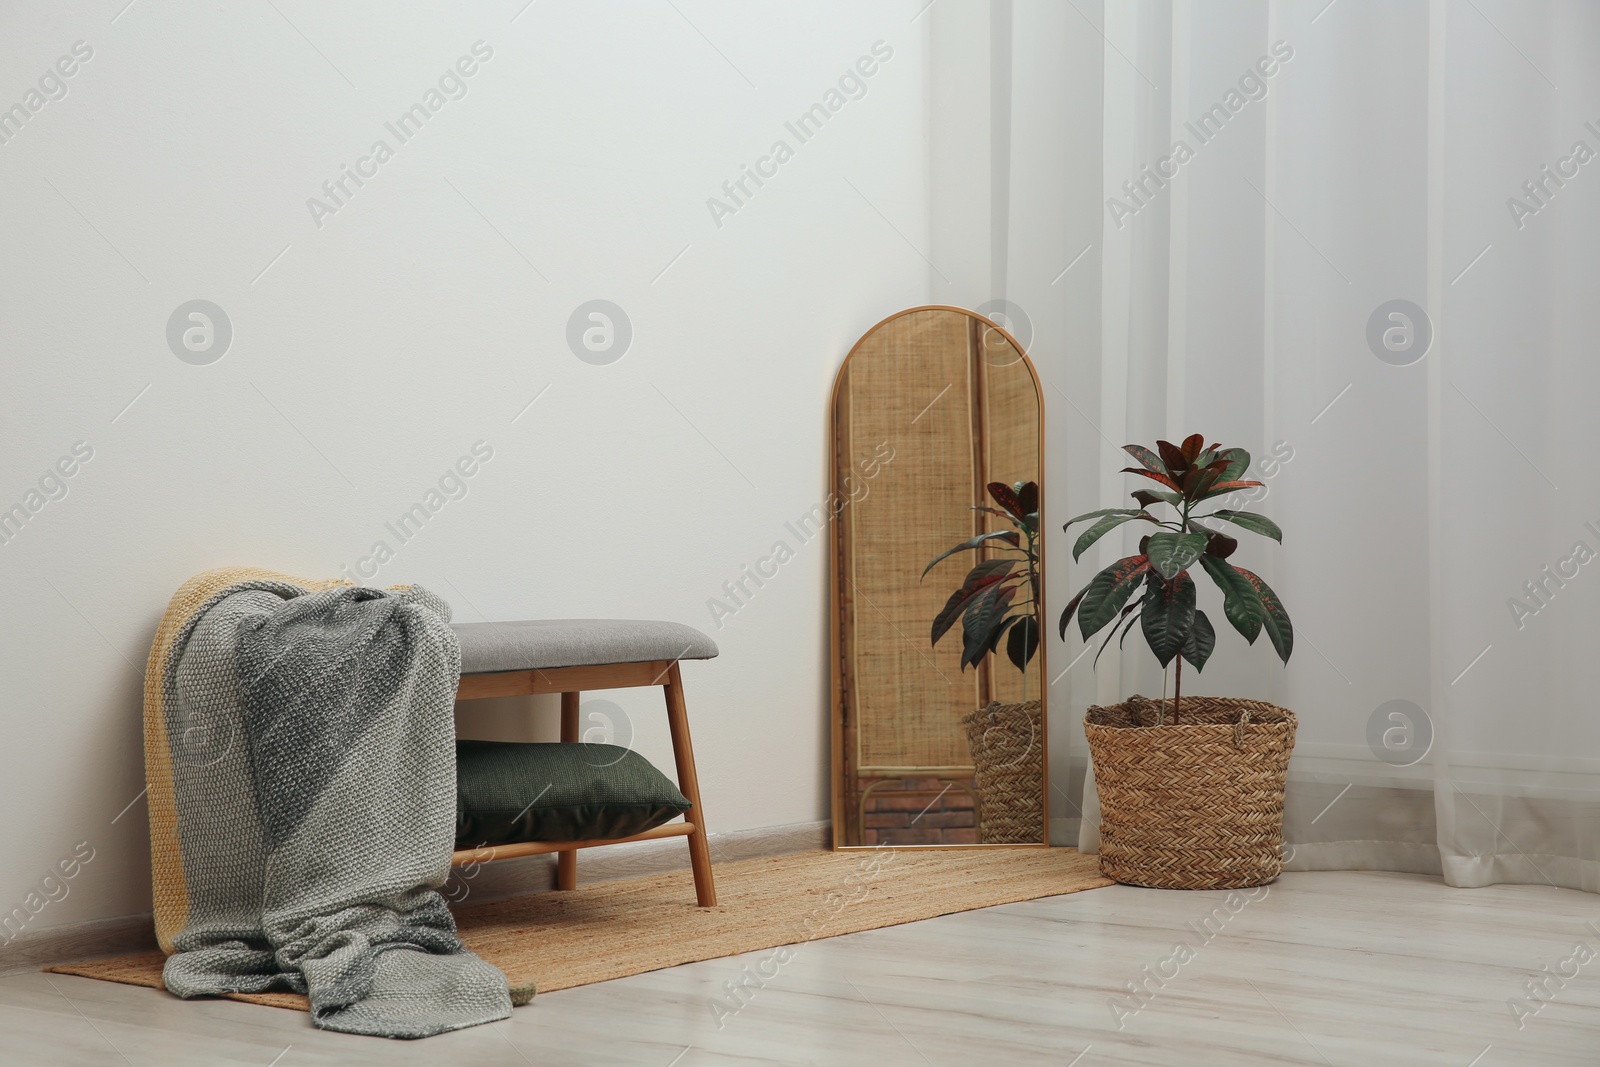 Photo of Interior accessories. Wooden bench with blanket, mirror and houseplant near white wall in room